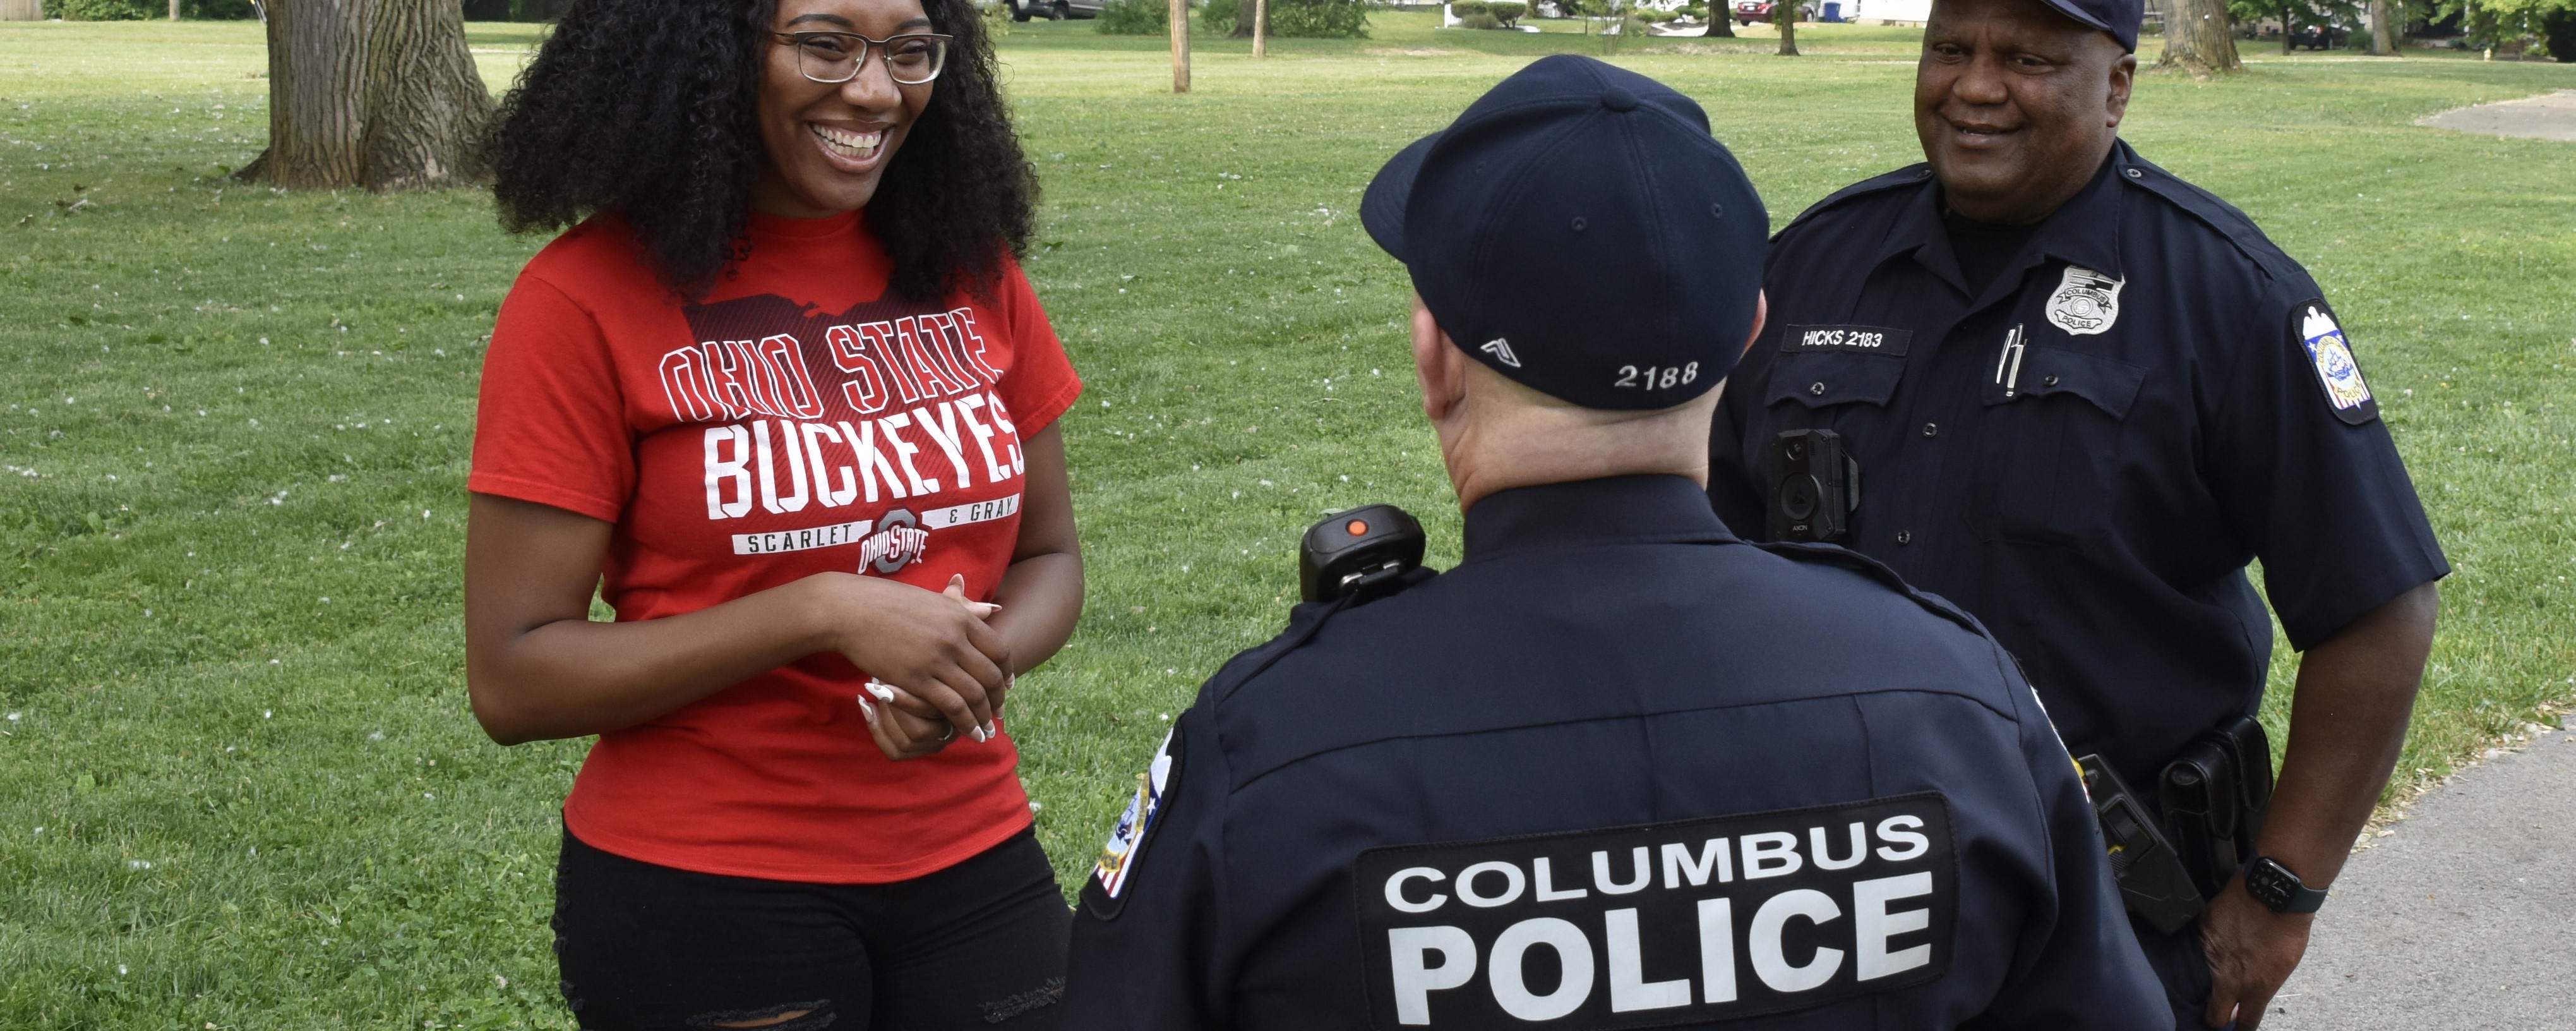 Columbus Police Officers Chatting with Ohio State Fan